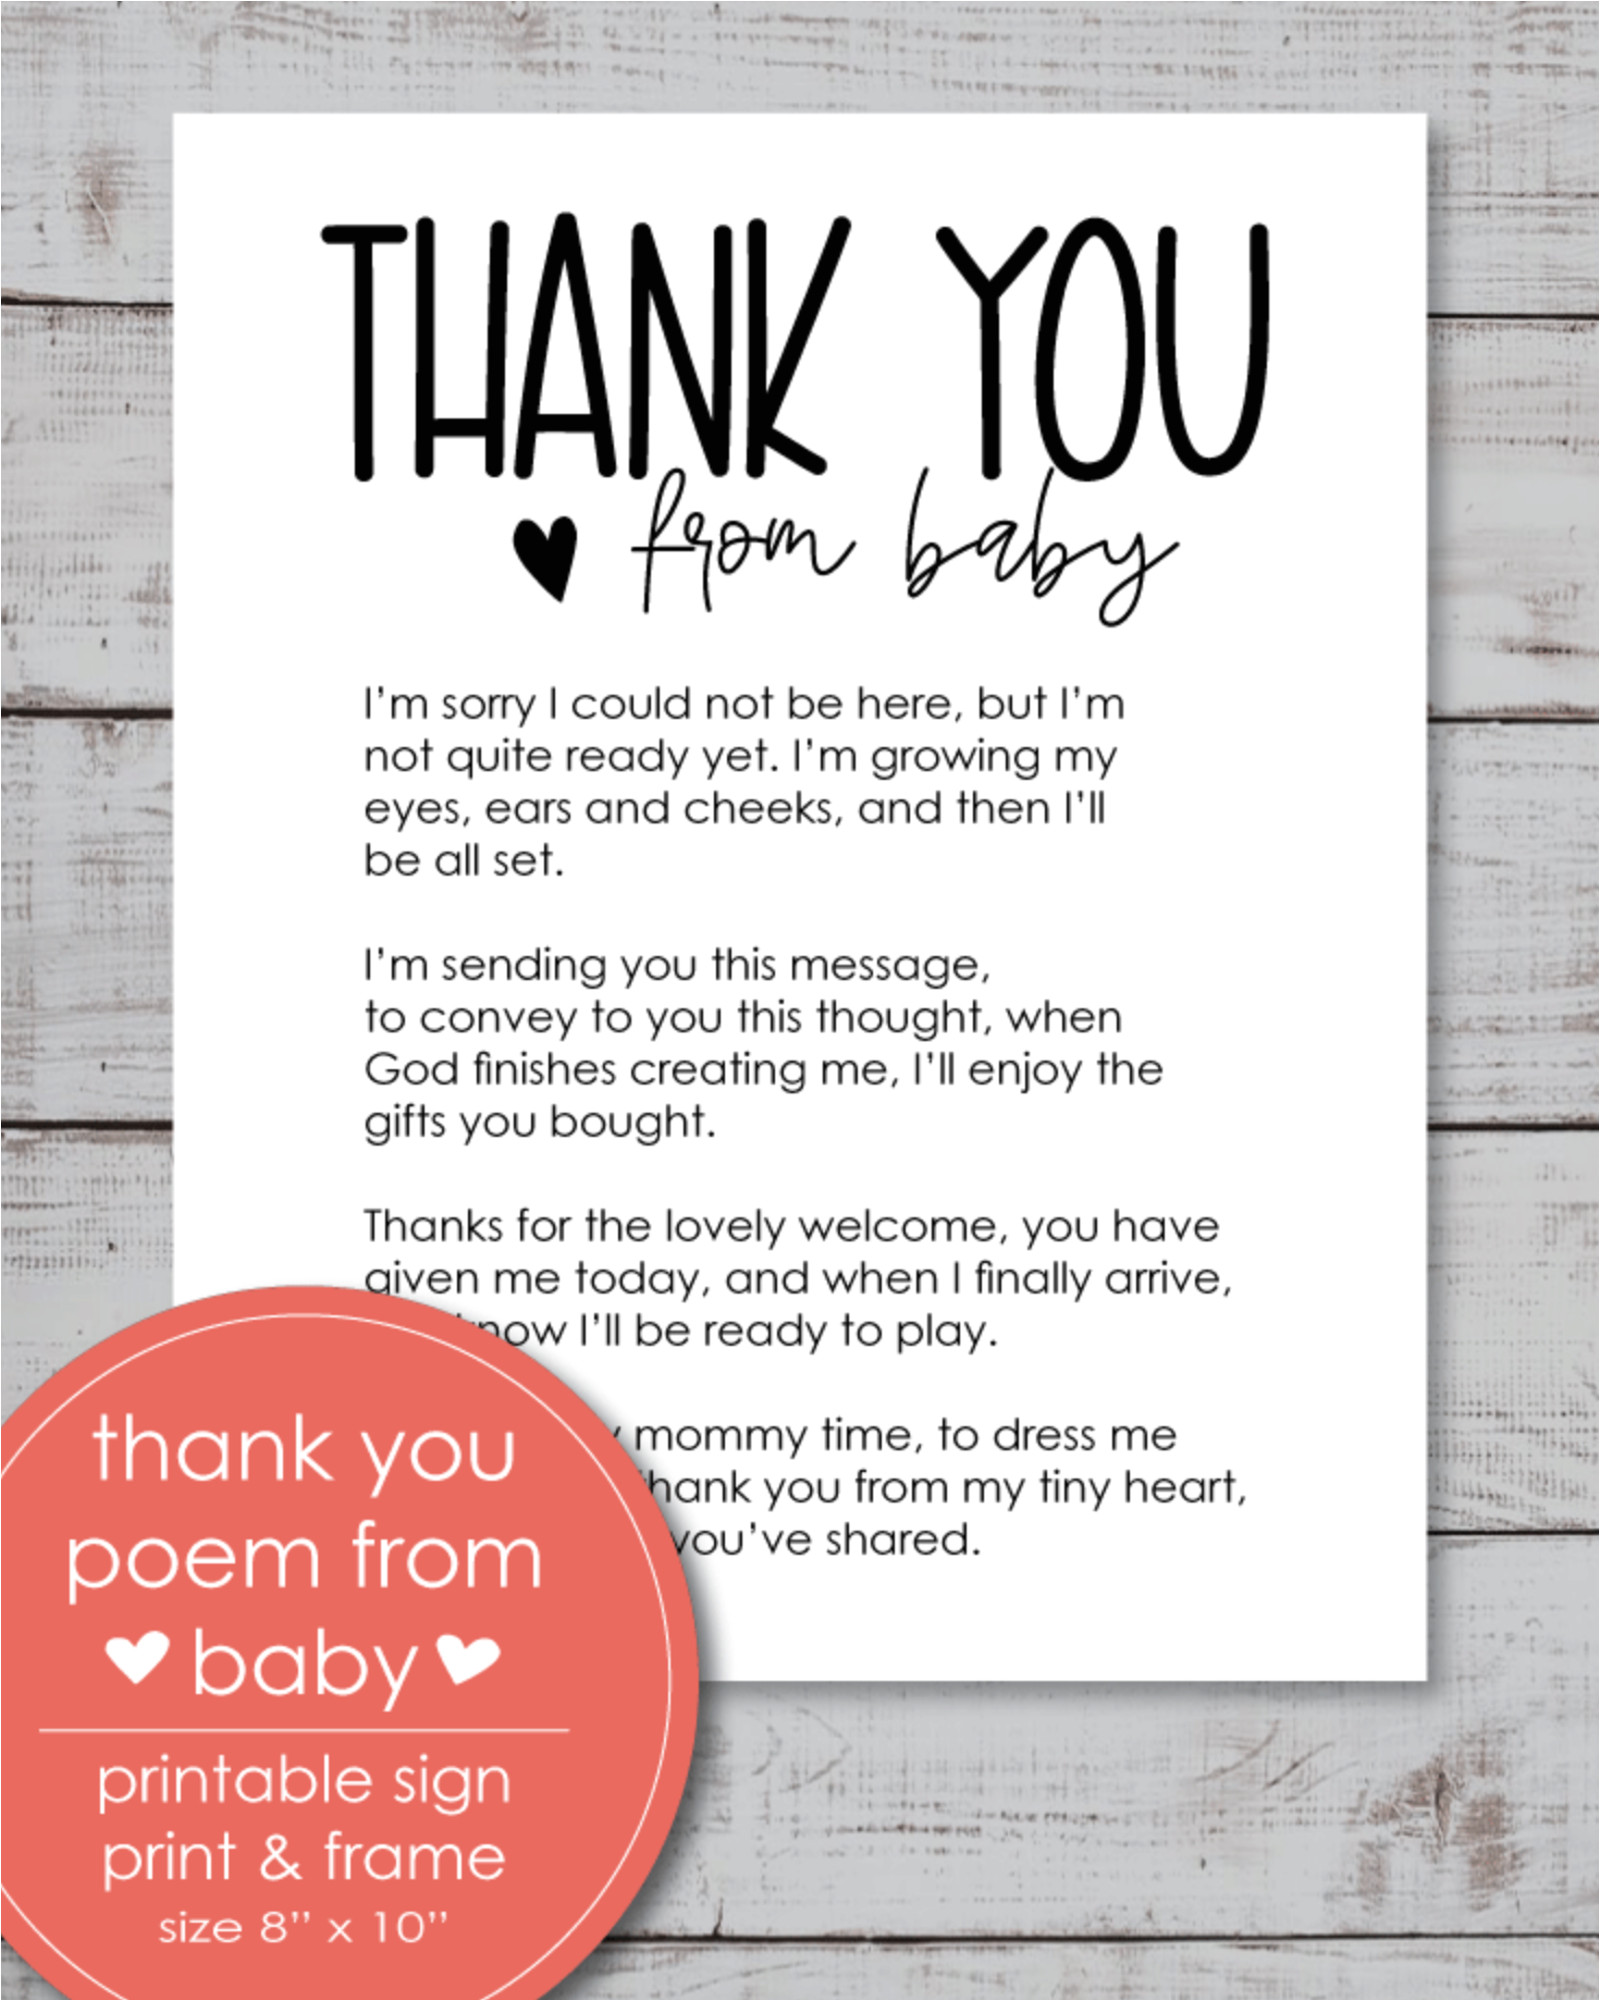 Verse for Thank You Card Printable Thank You Poem From Baby 8×10 Sign In 2020